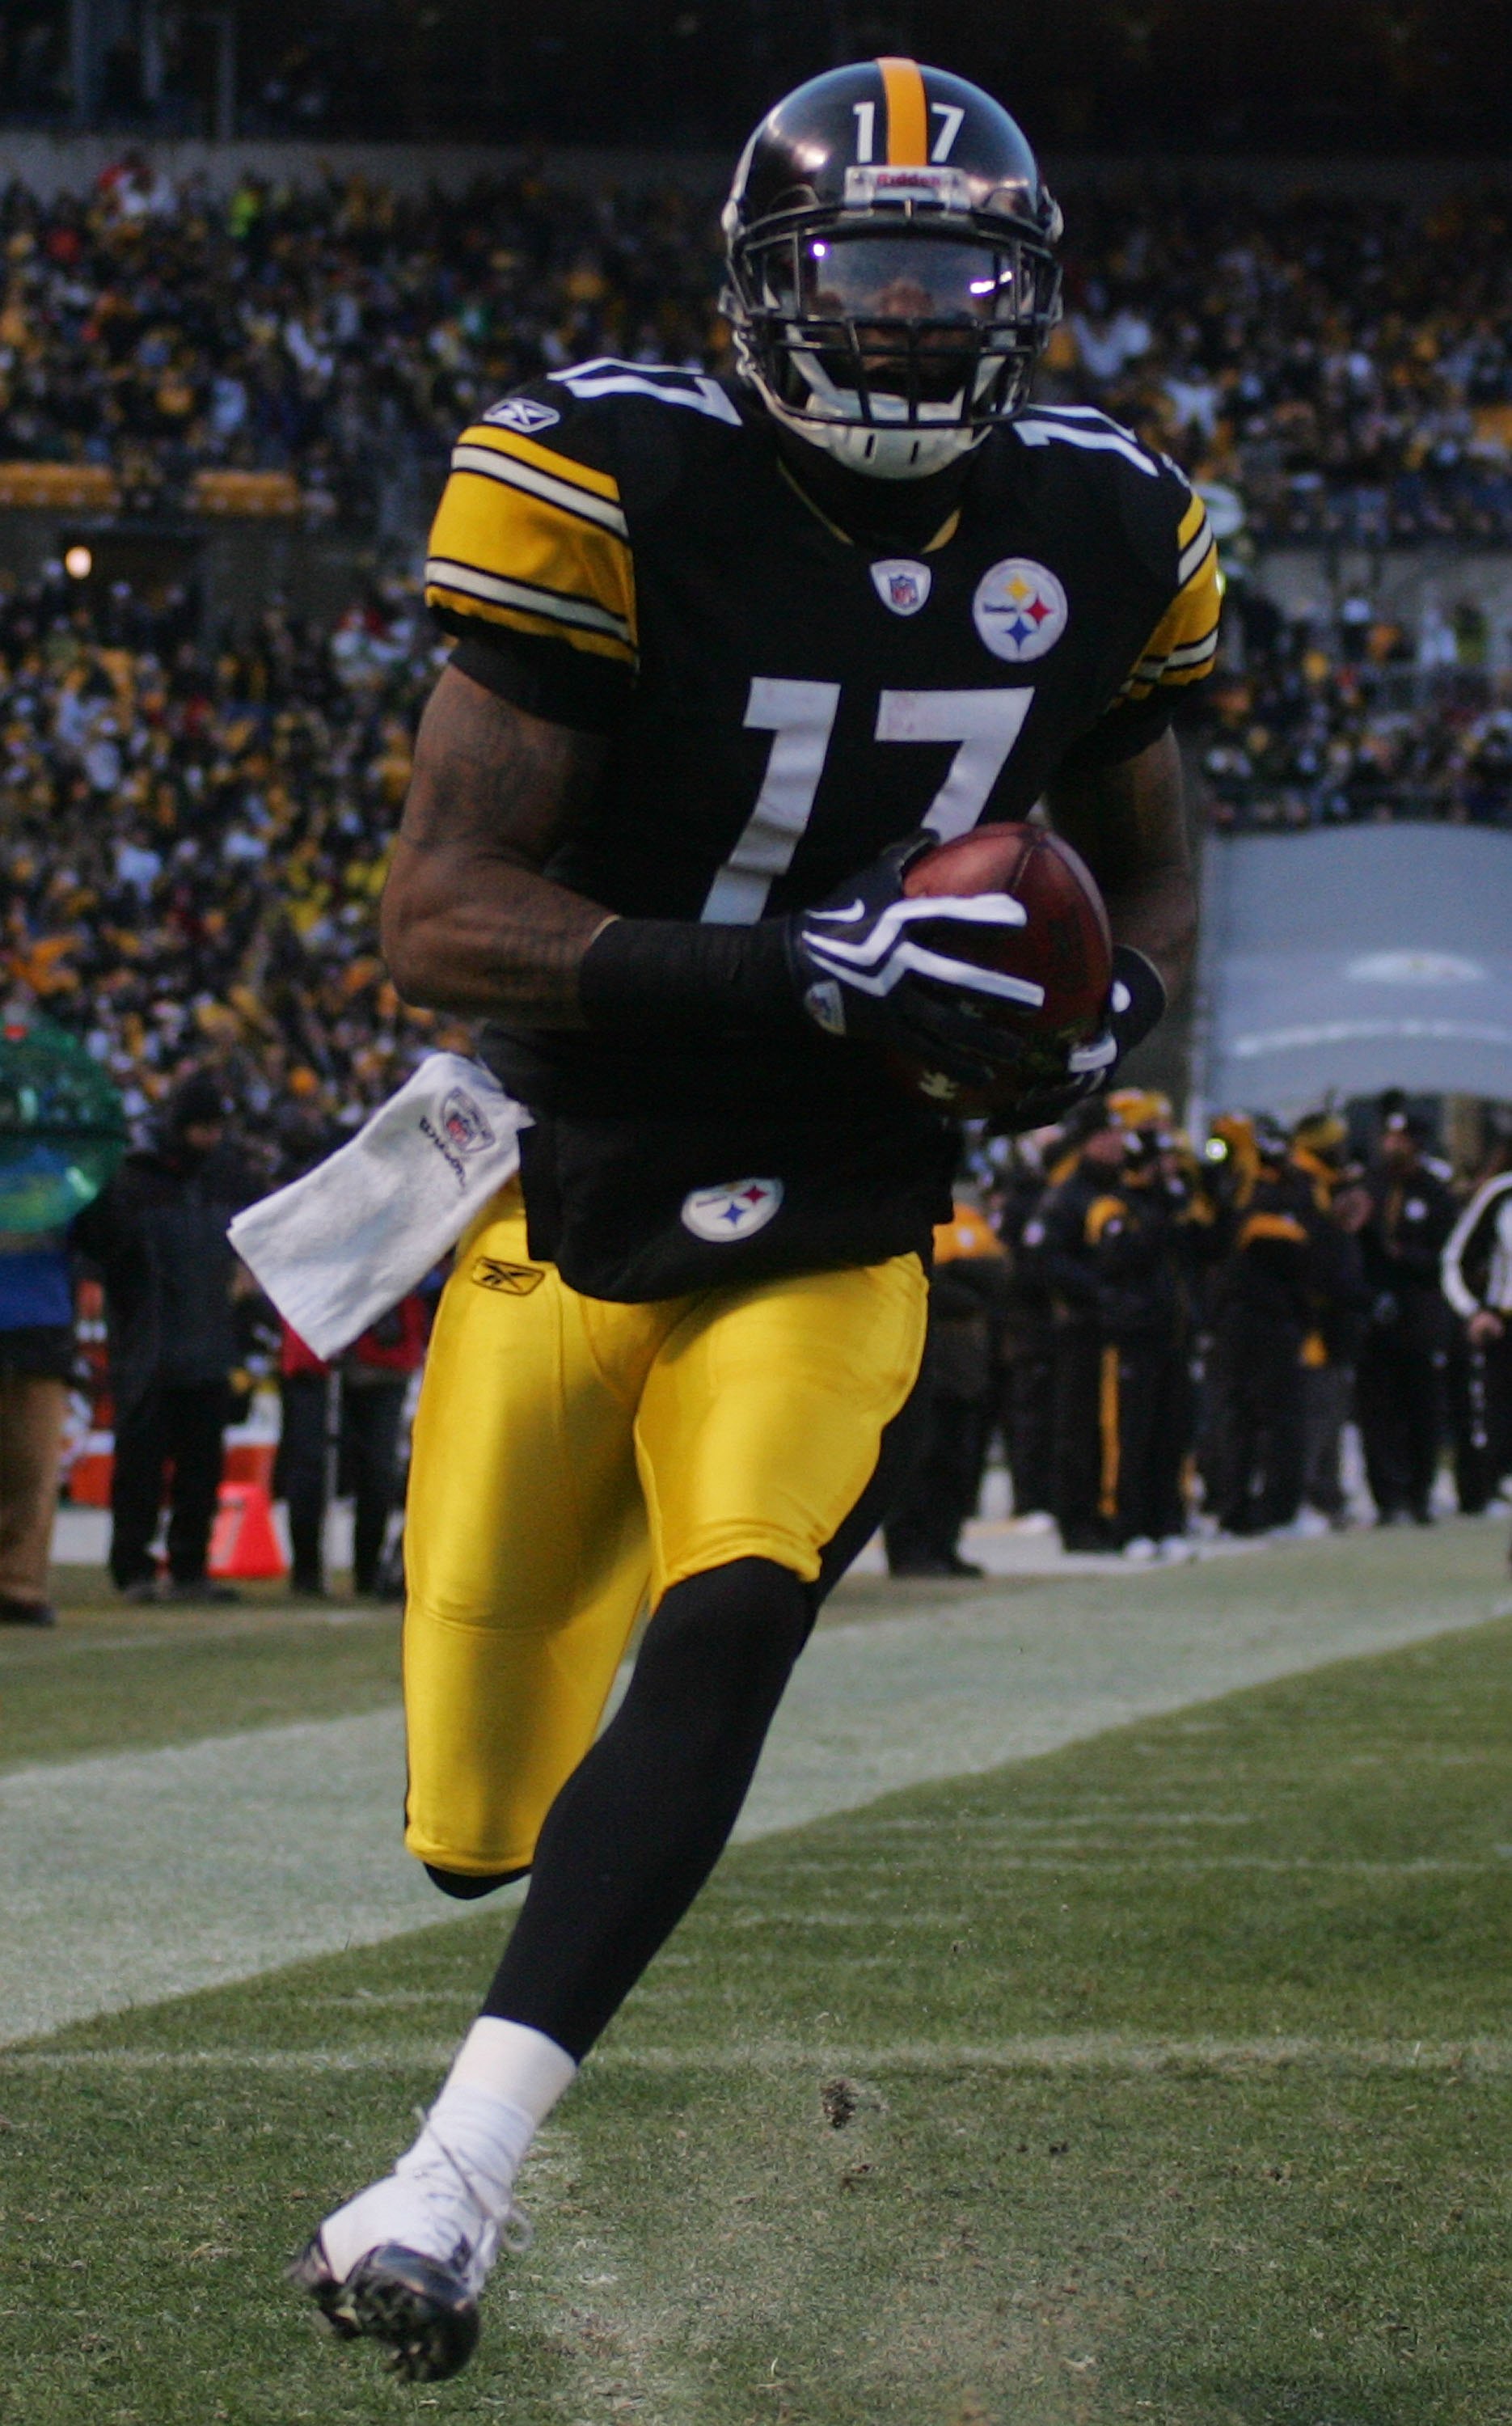 PITTSBURGH - DECEMBER 20:  Mike Wallace #17 of the Pittsburgh Steelers runs in for a touchdown in the first quarter against the Green Bay Packers during the game on December 20, 2009 at Heinz Field in Pittsburgh, Pennsylvania.  (Photo by Jared Wickerham/G